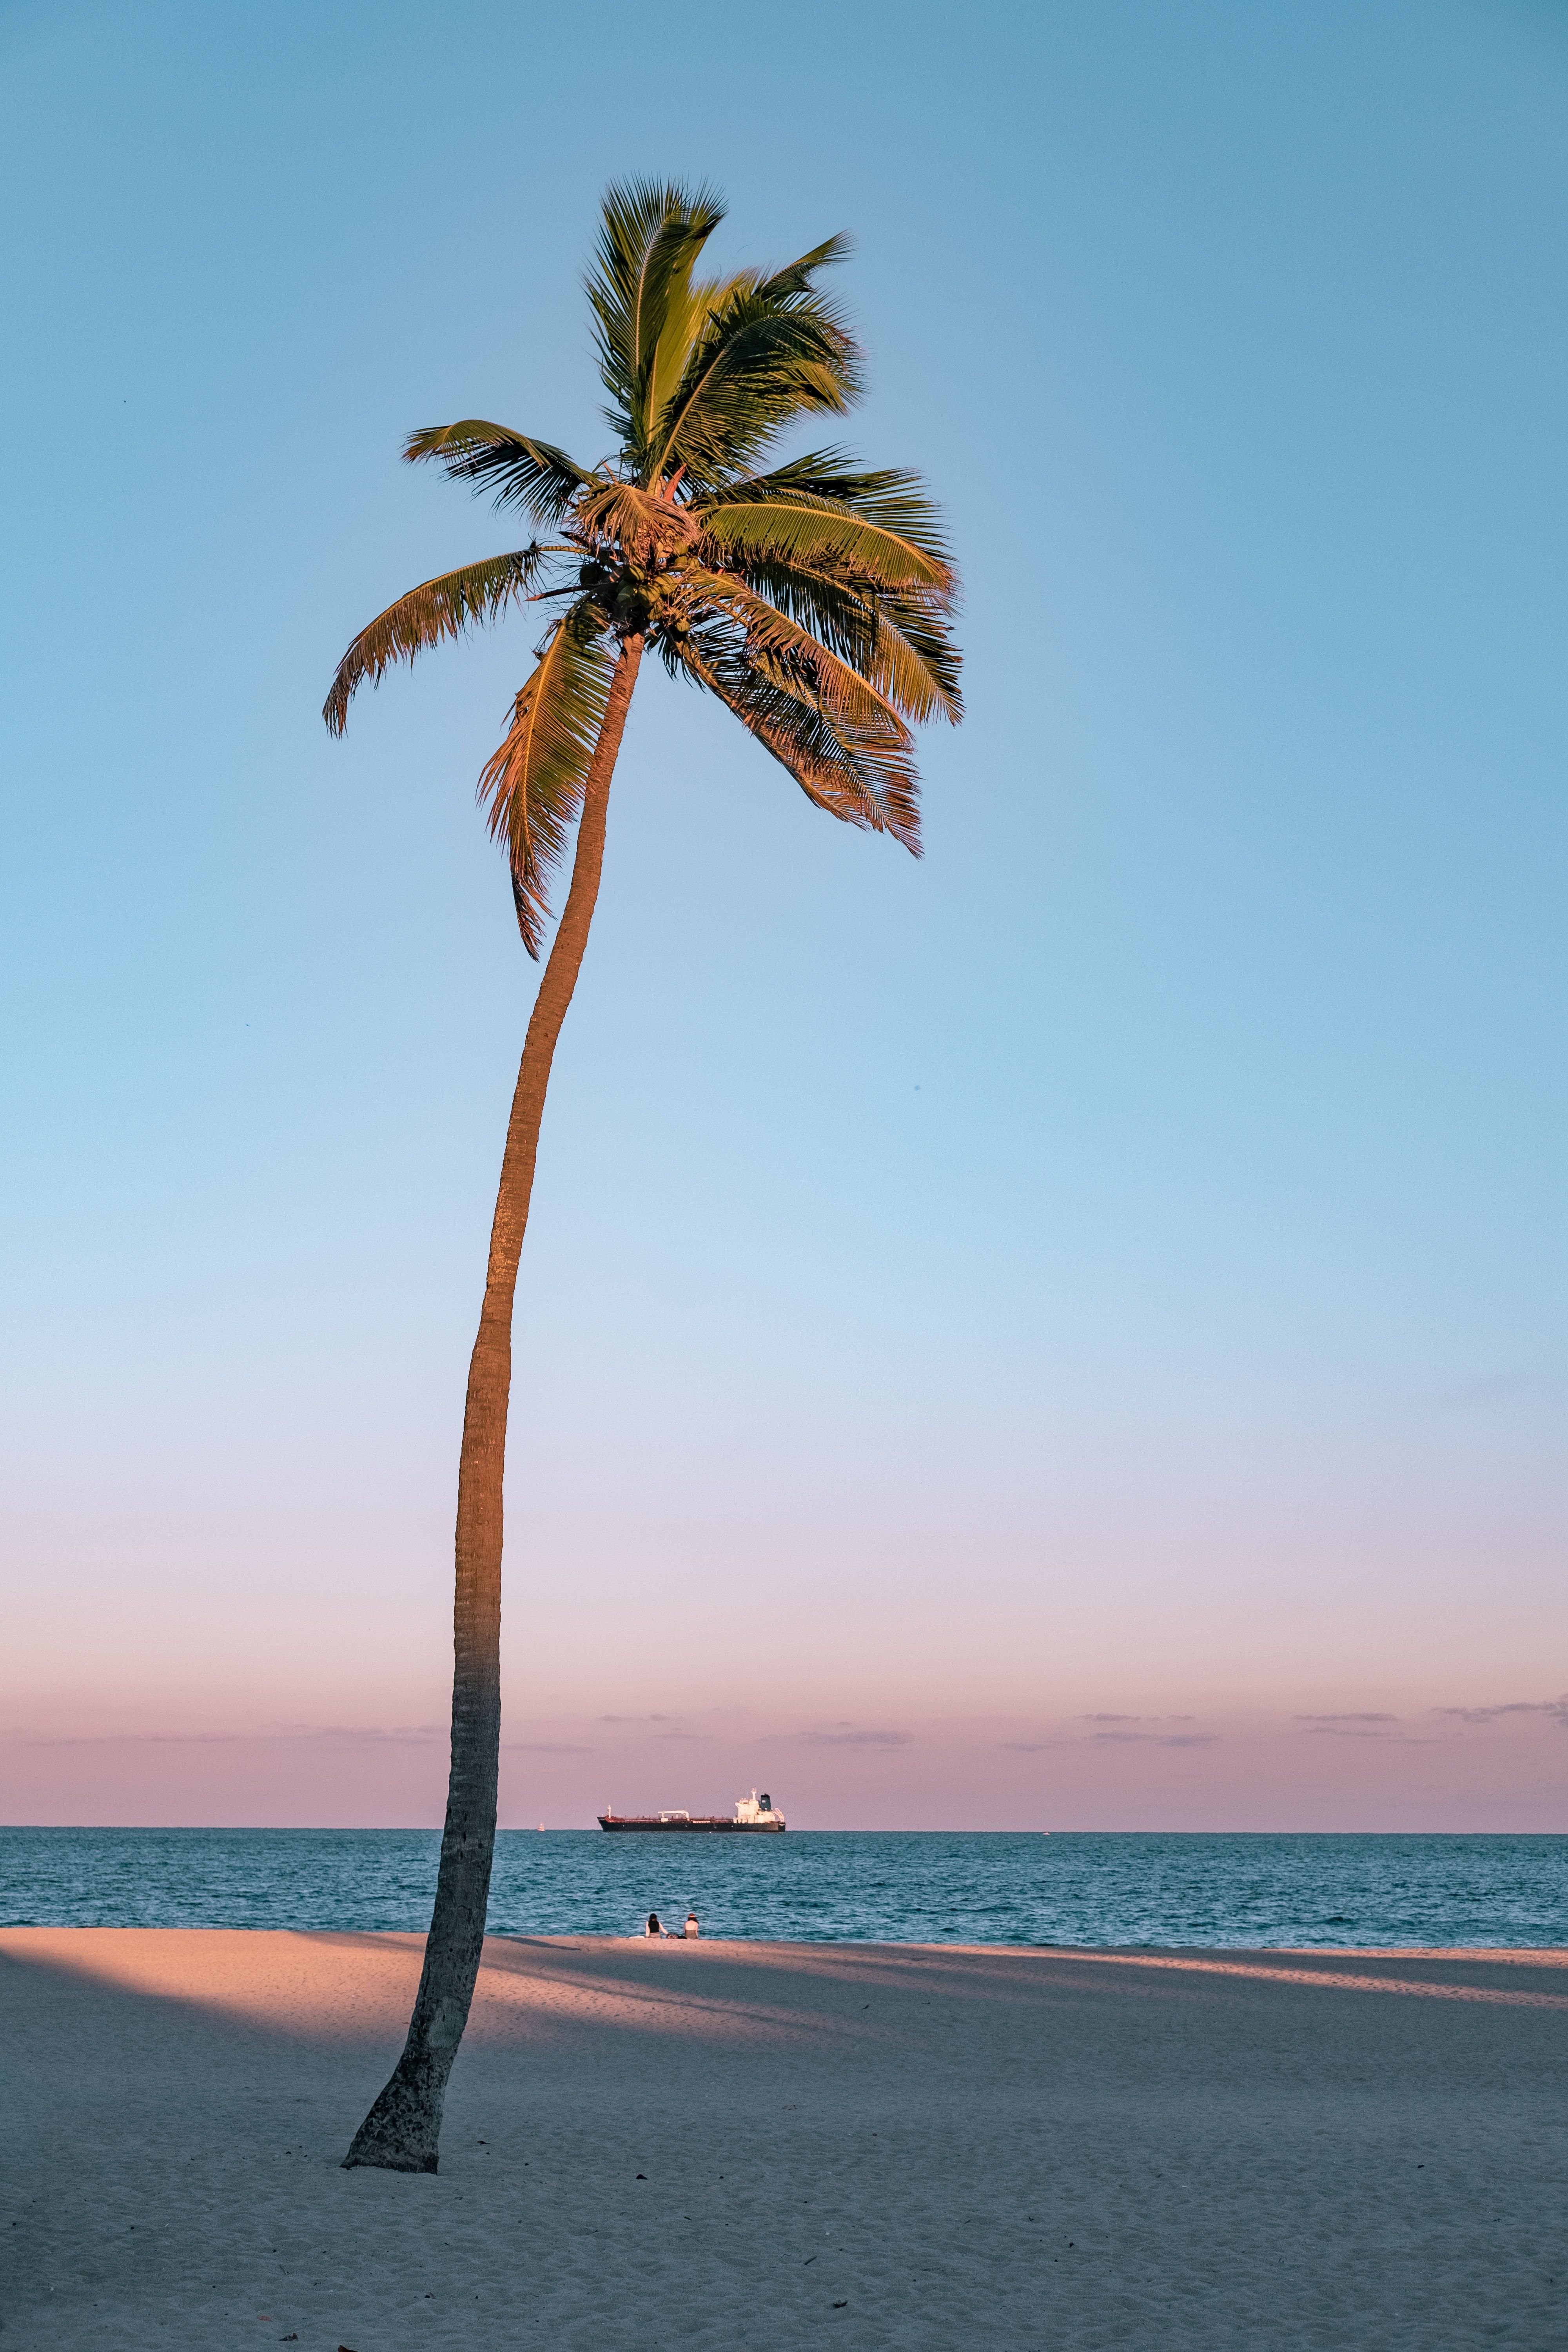 A palm tree on the beach with water in background - Beach, palm tree, coconut